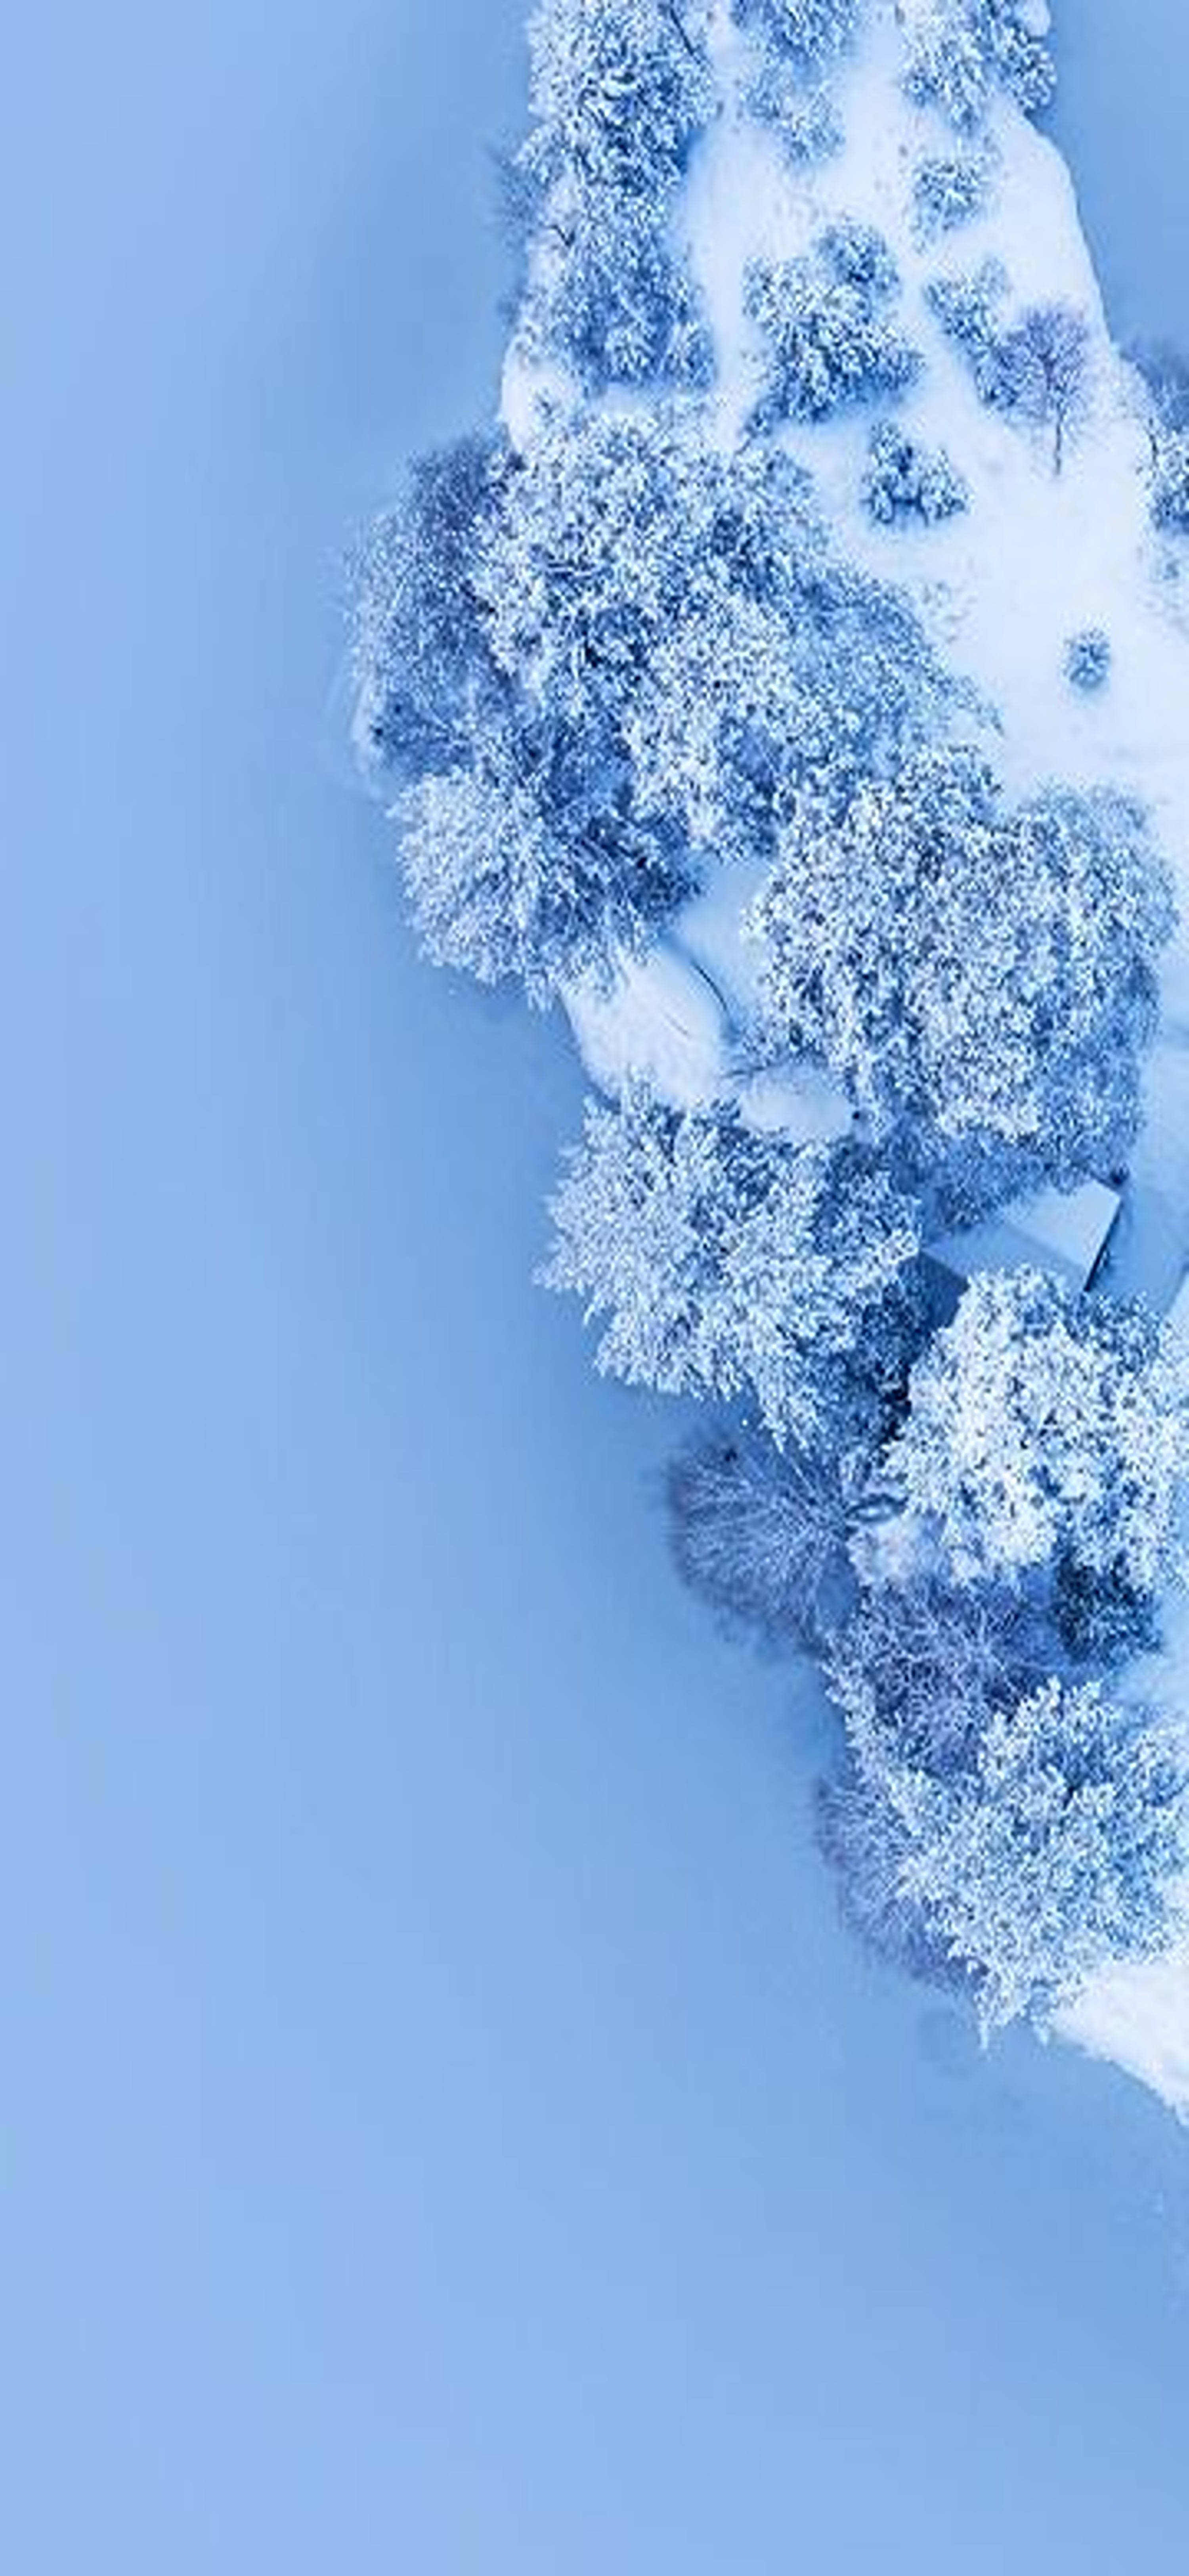 Snow-covered Trees Redmi Note 9 Pro Wallpaper